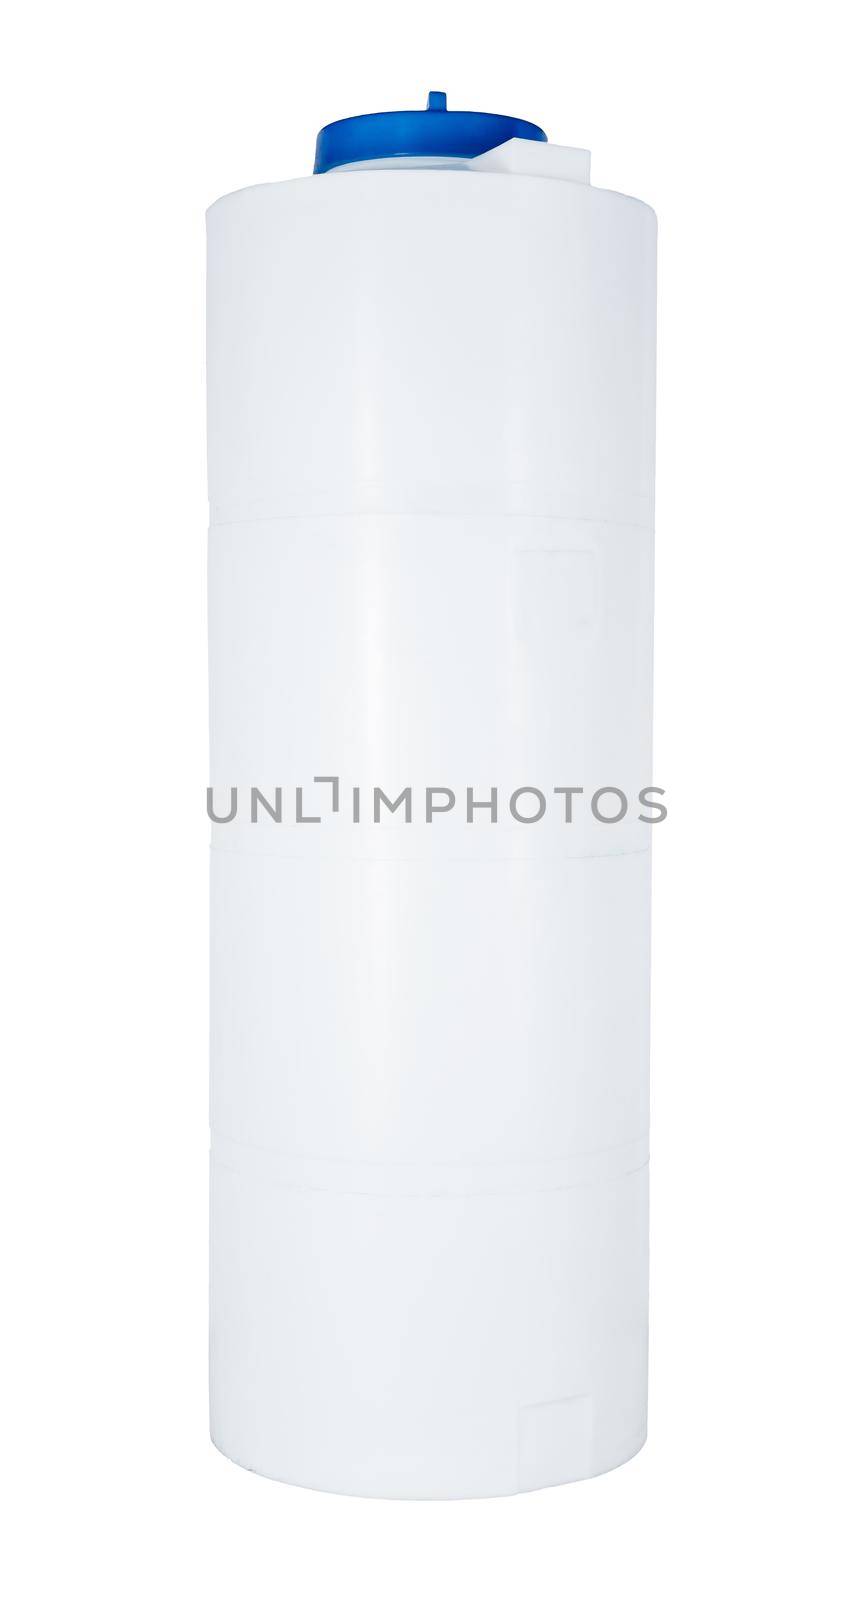 White plastic Water Tank isolated on white background close up.